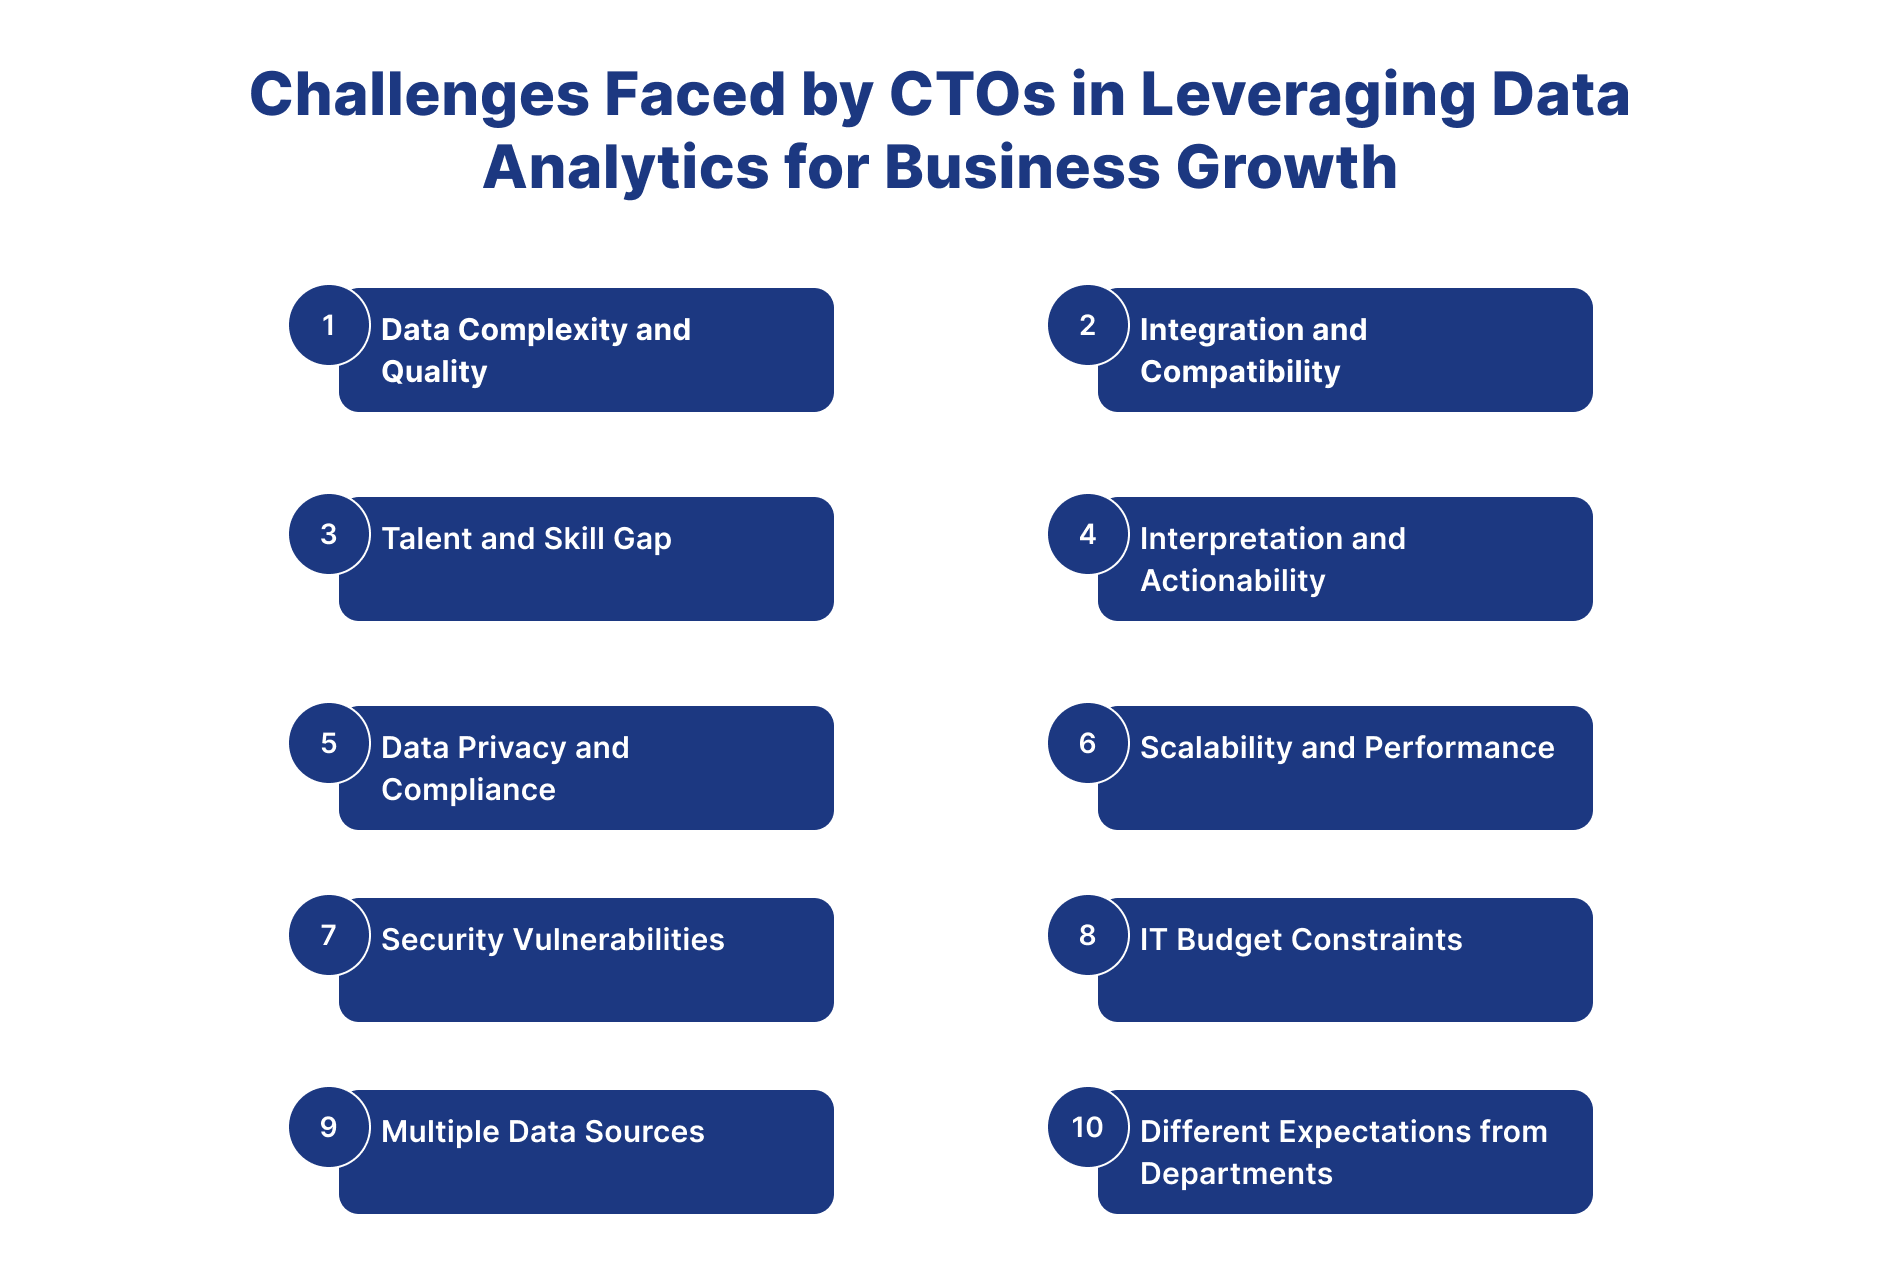 Leveraging Data Analytics For Business Growth